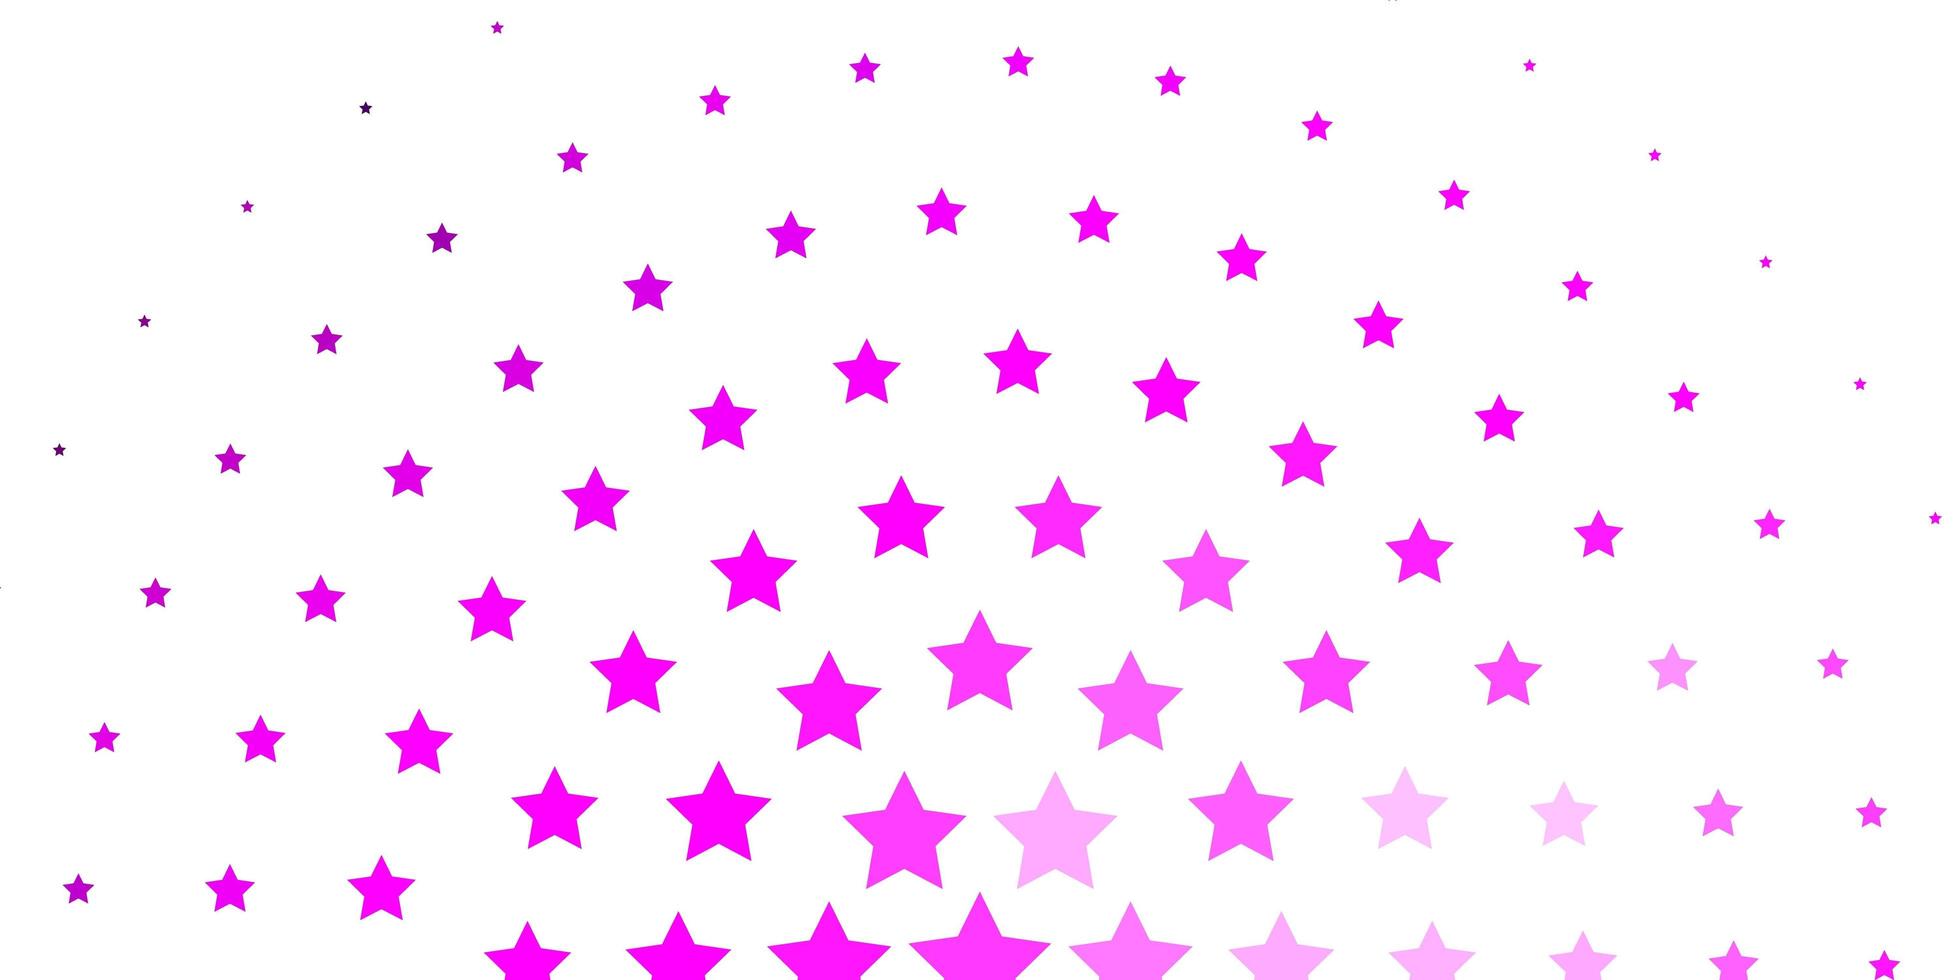 Light Pink vector pattern with abstract stars Blur decorative design in simple style with stars Pattern for wrapping gifts